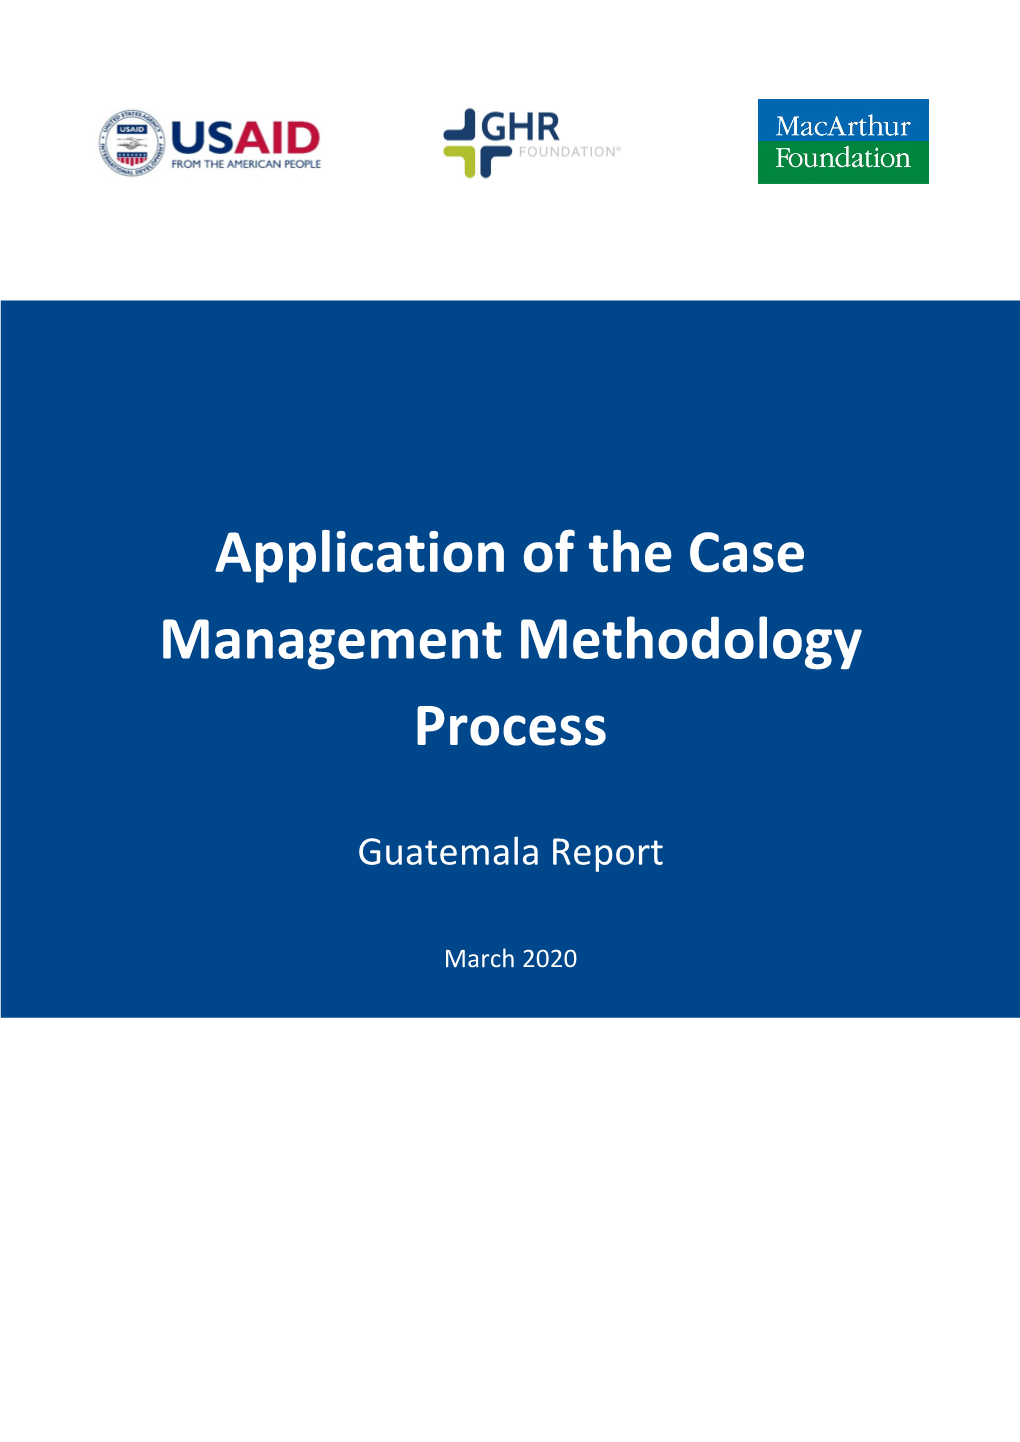 Application of the Case Management Methodology Process